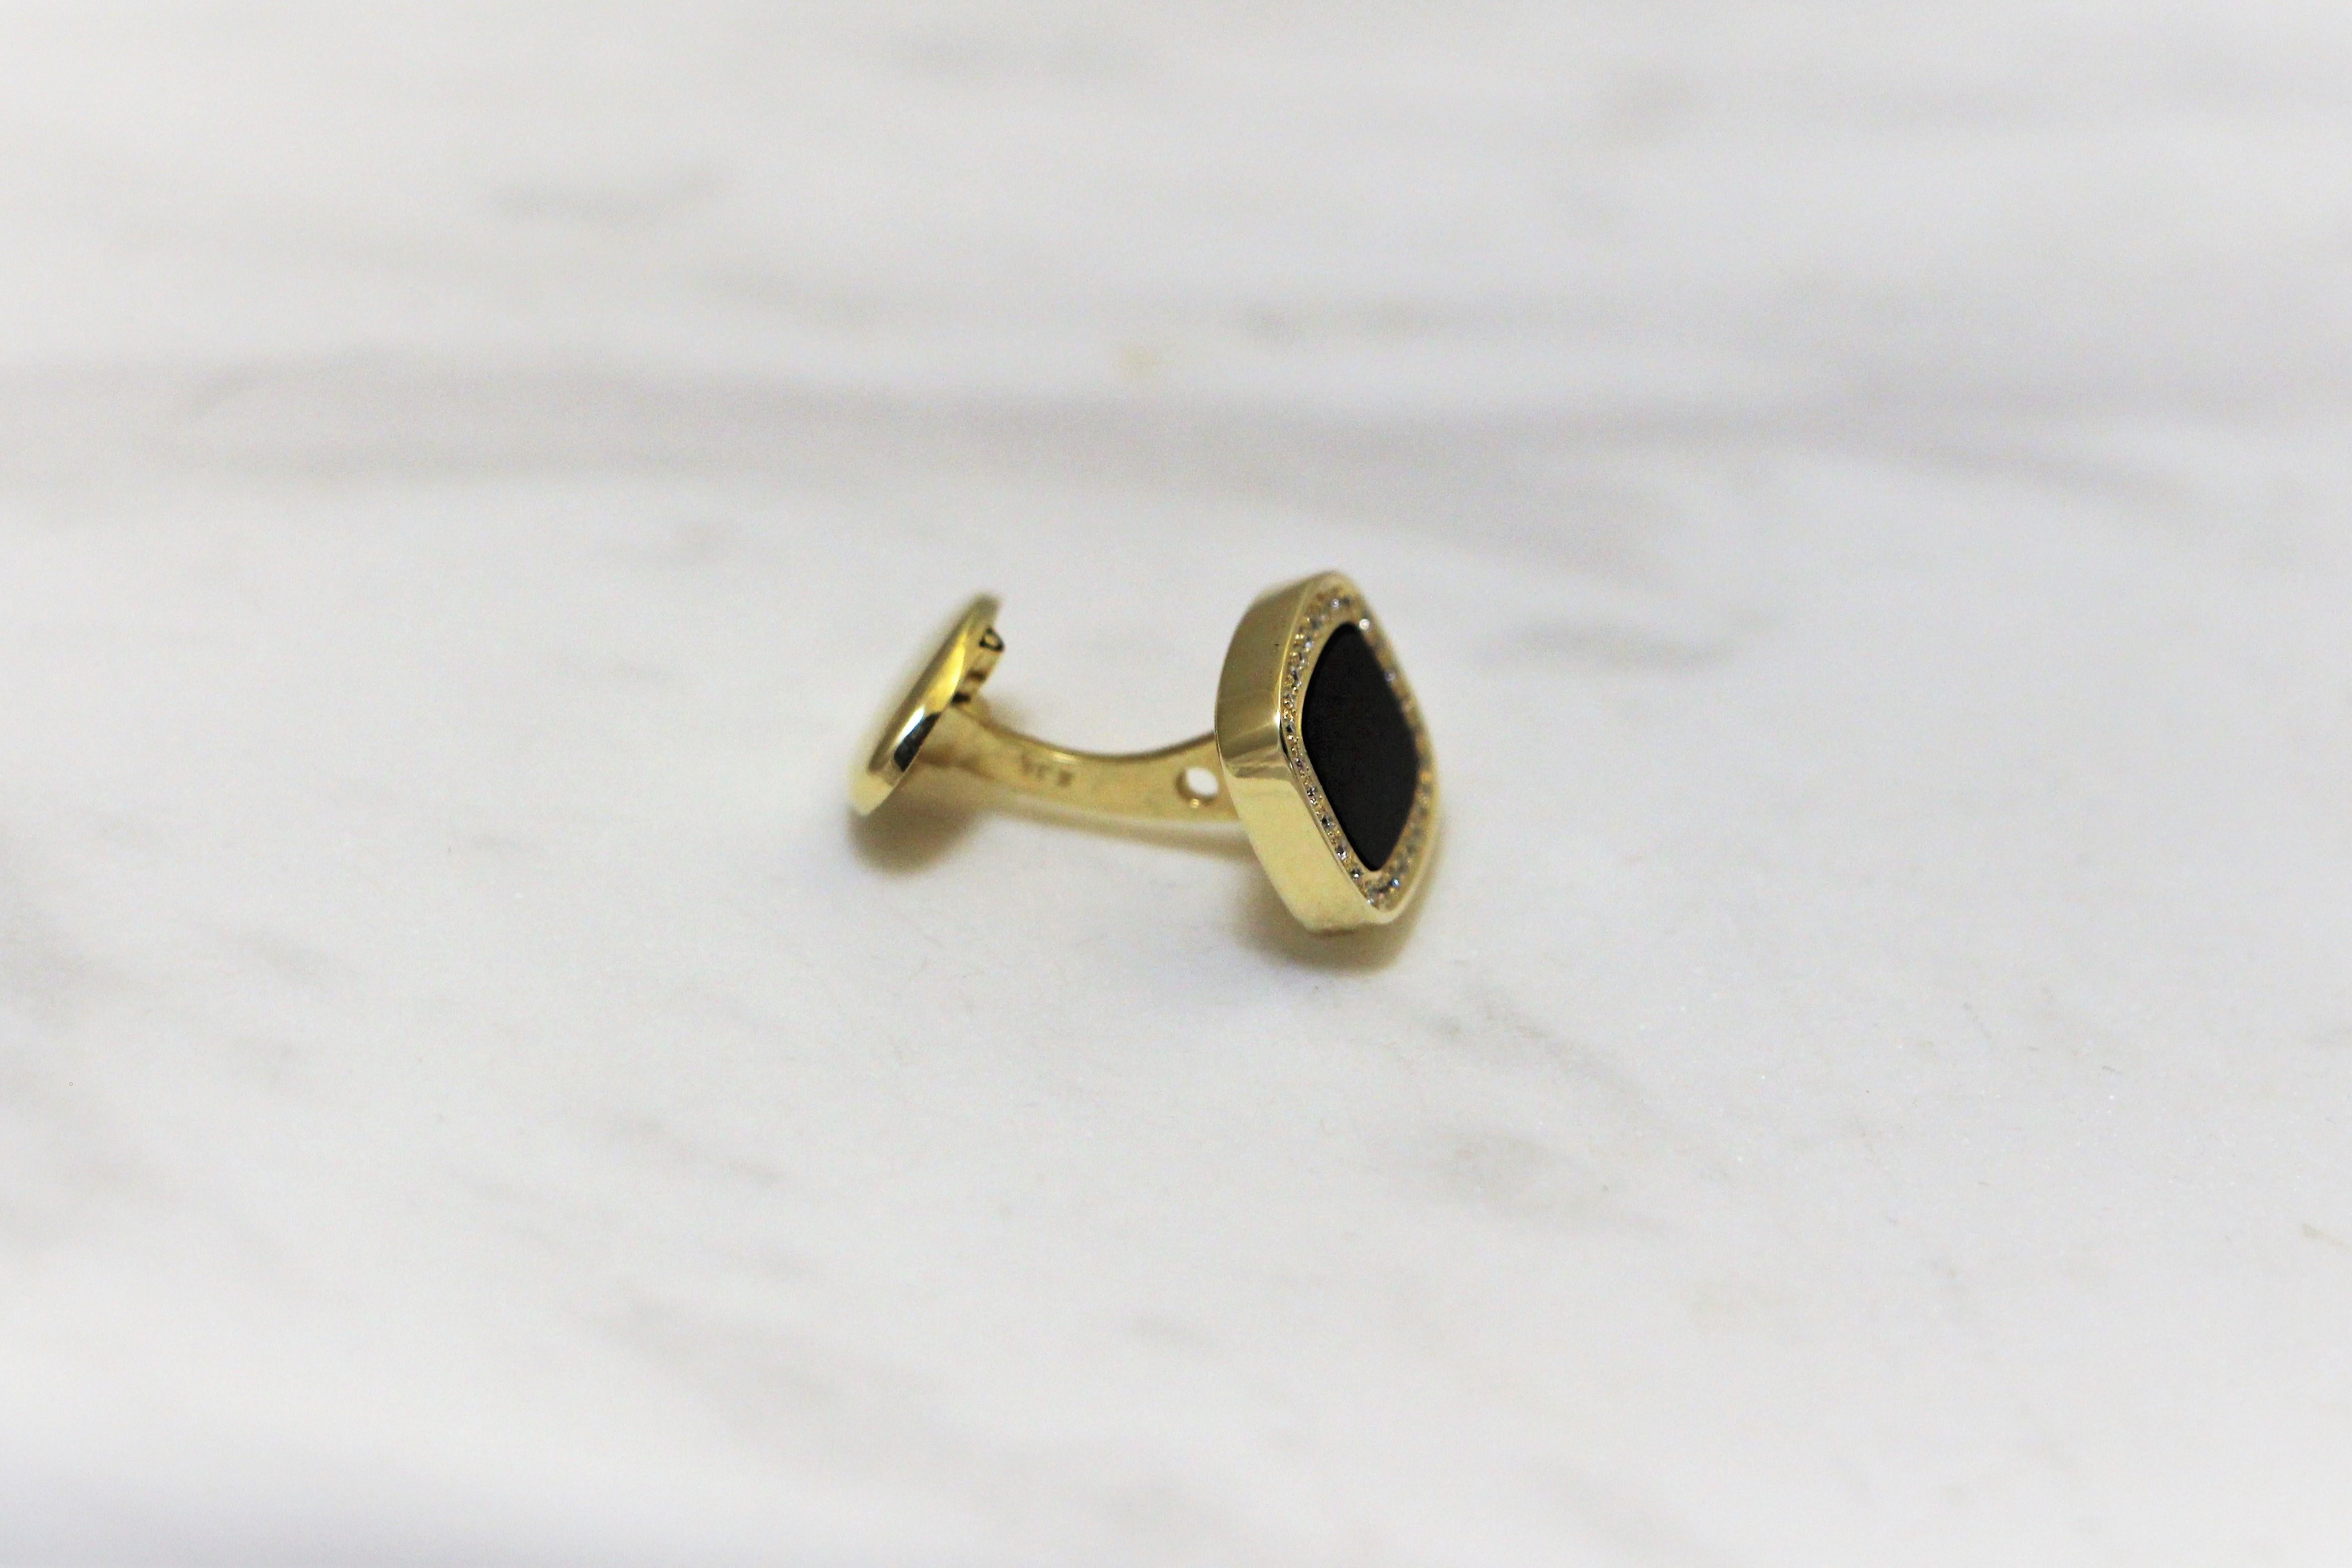 Unique Cufflinks handcrafted in 14Kt yellow gold, featuring hand carved black onyx and Pave brilliant cut diamonds 0.244 ct total. This unique combination captures the eternal spirit of fashion with timeless sophistication. The Black Onyx Cufflinks